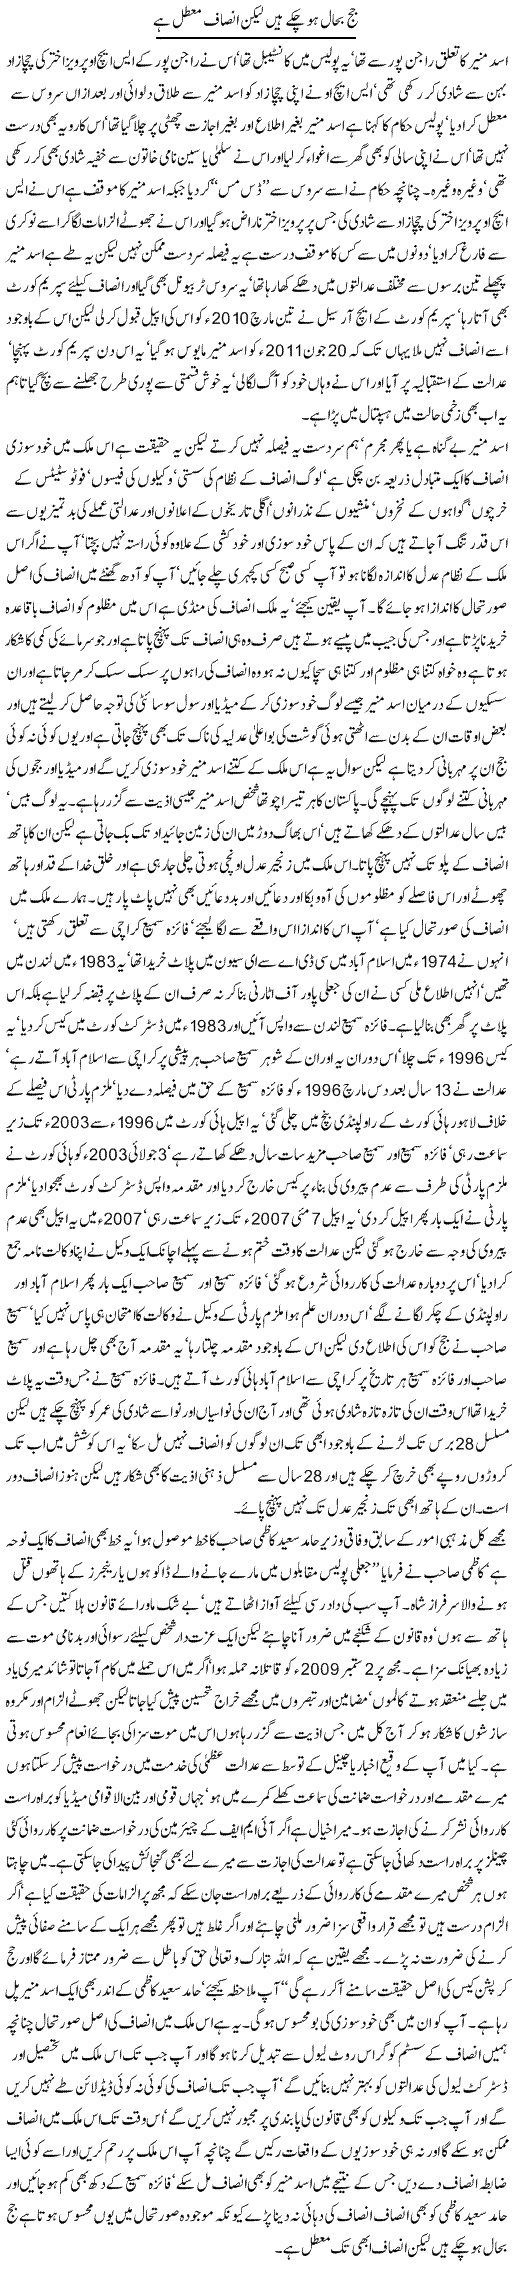 Judges and Justice Express Column Javed Chaudhry 23 June 2011